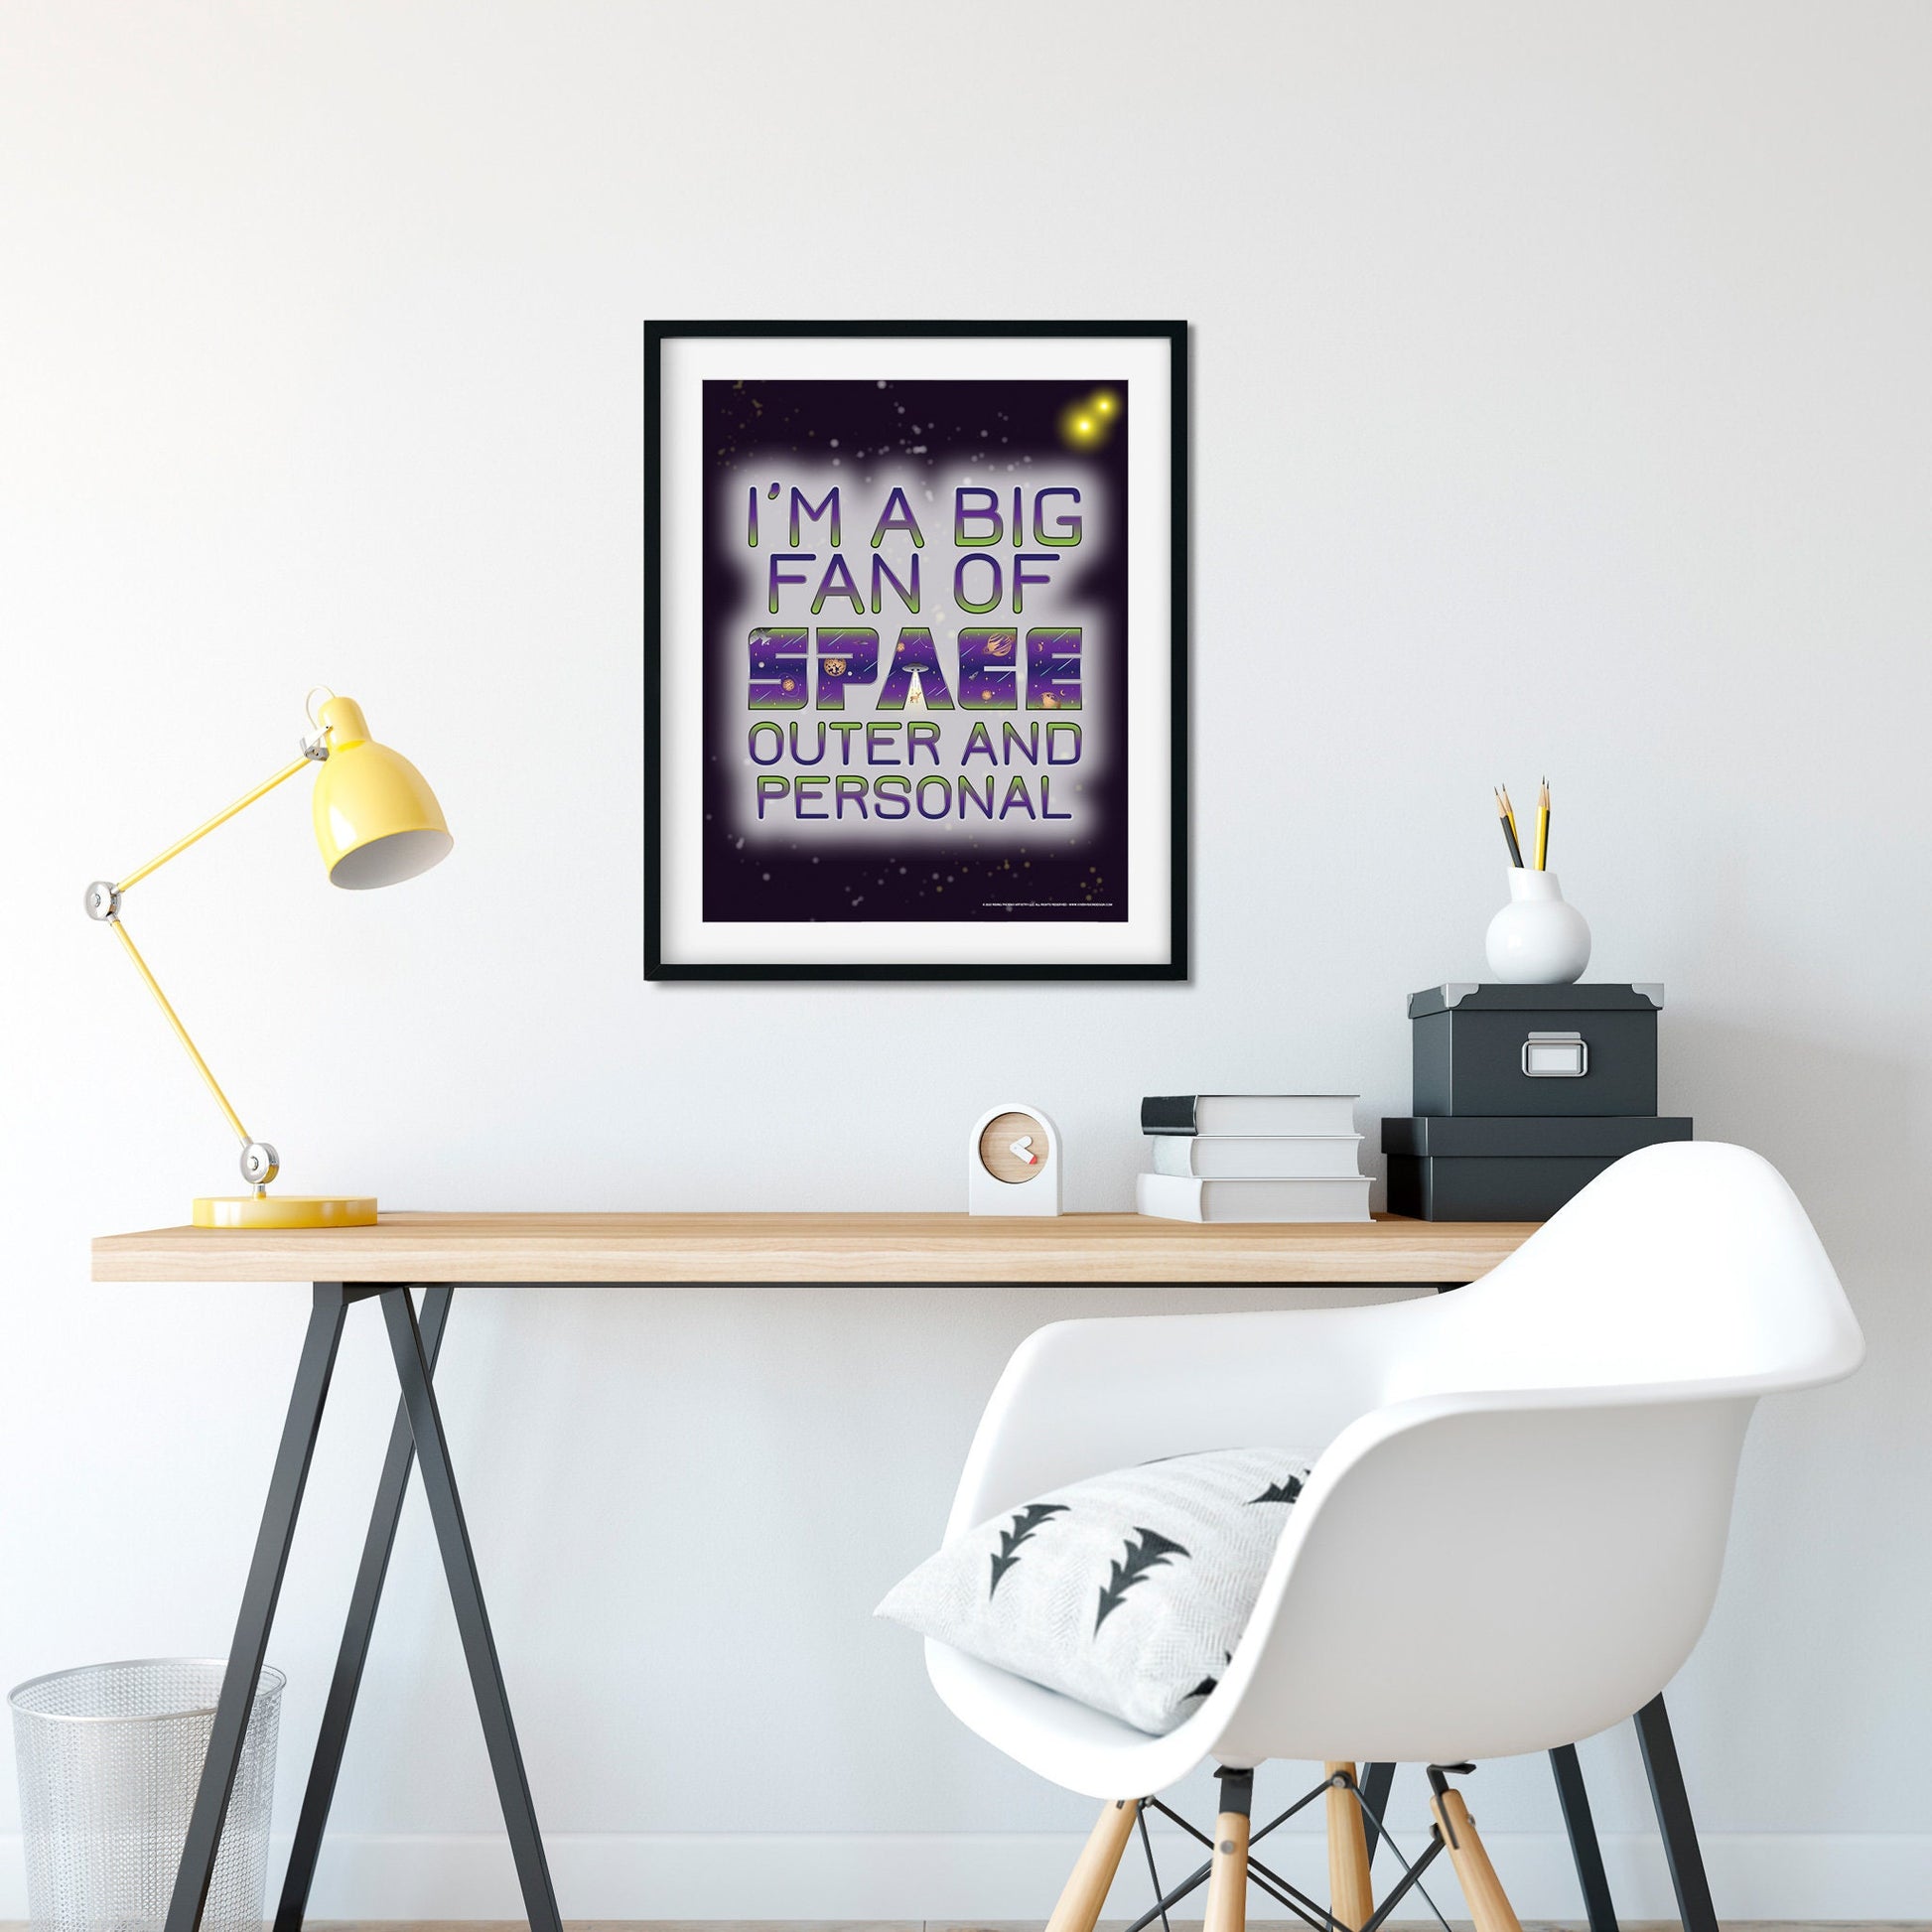 Big Fan of Space - Outer and Personal 11x14 Art Poster framed on wall